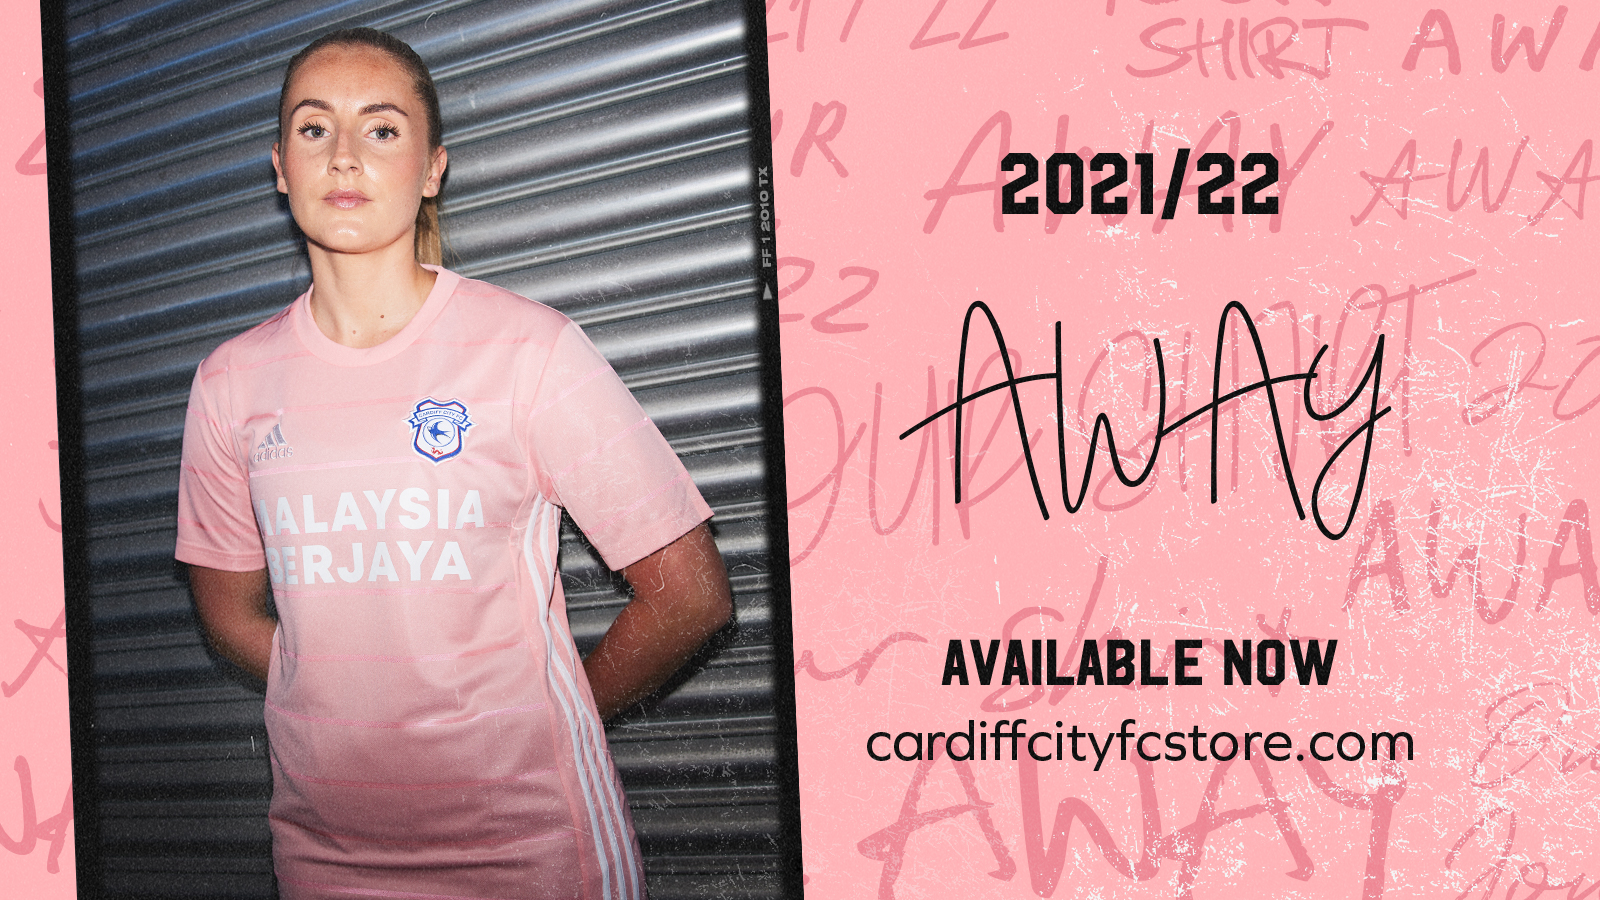 Our 2021/22 away kit is now available...